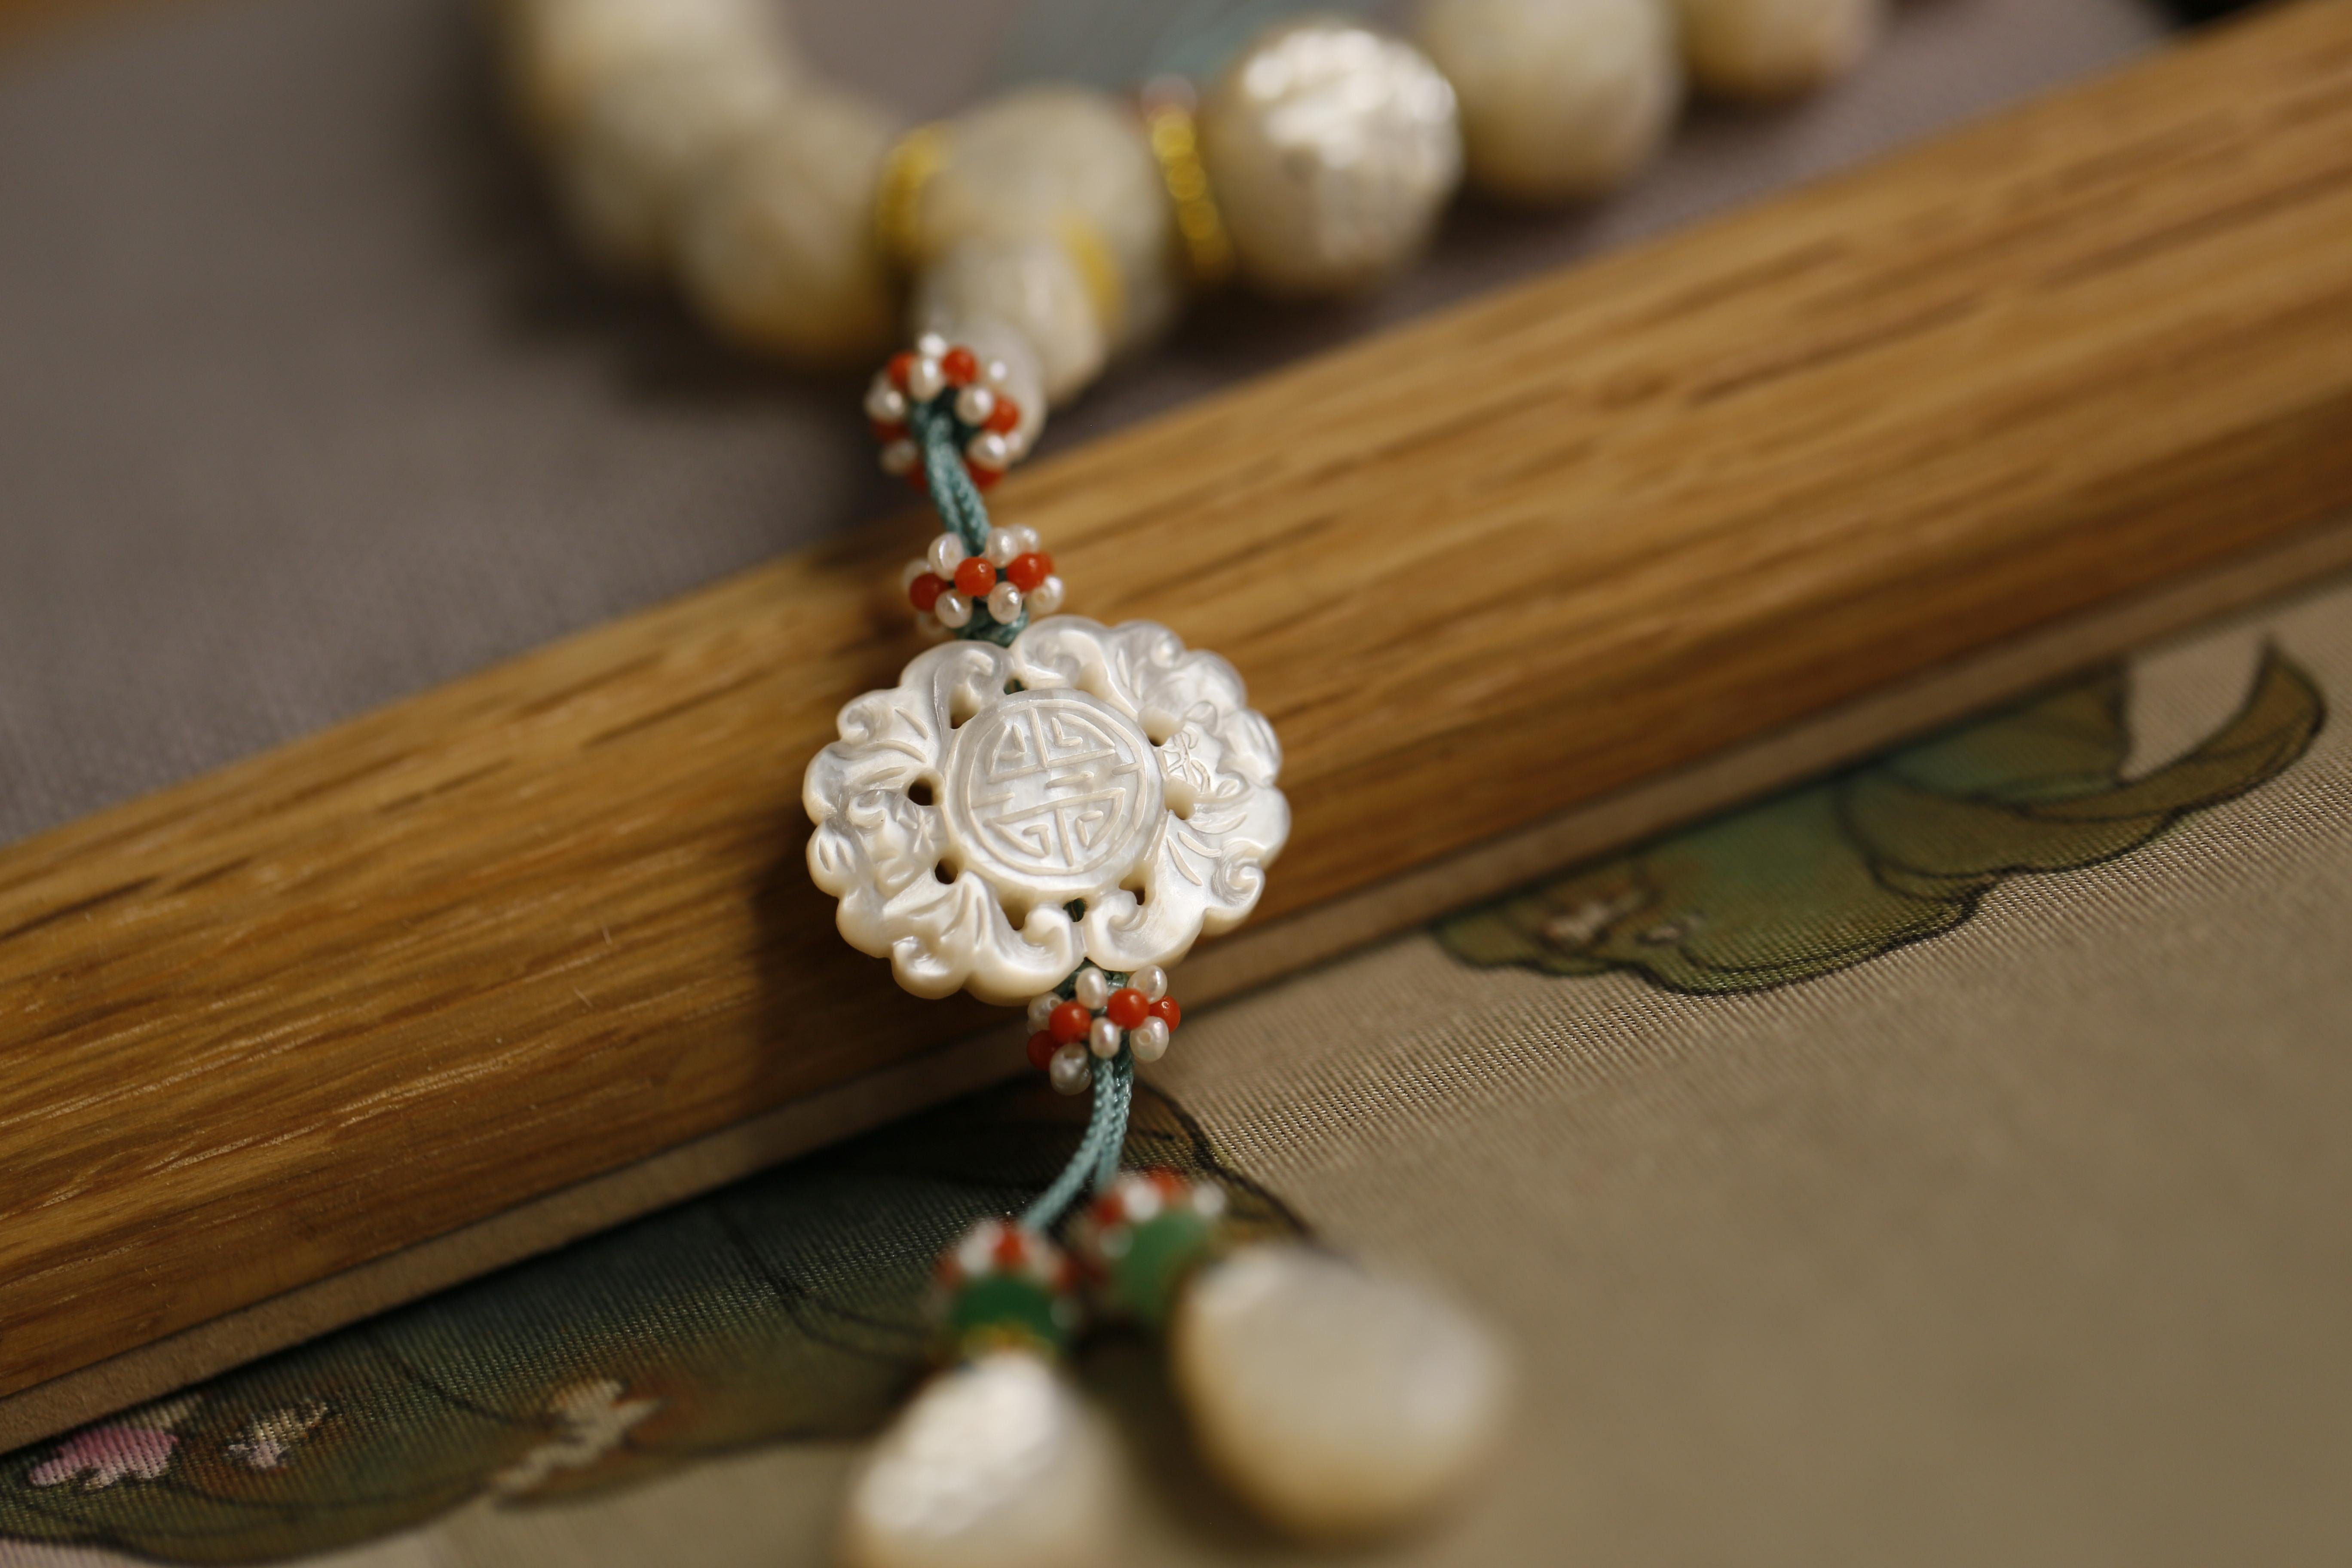 This bead bracelet is made up of carved oyster shell beads in the classic Chinese style. These beads are interspersed with green jade beads carved in the same style. Hanging from the main string is a carved plaque pendant. 